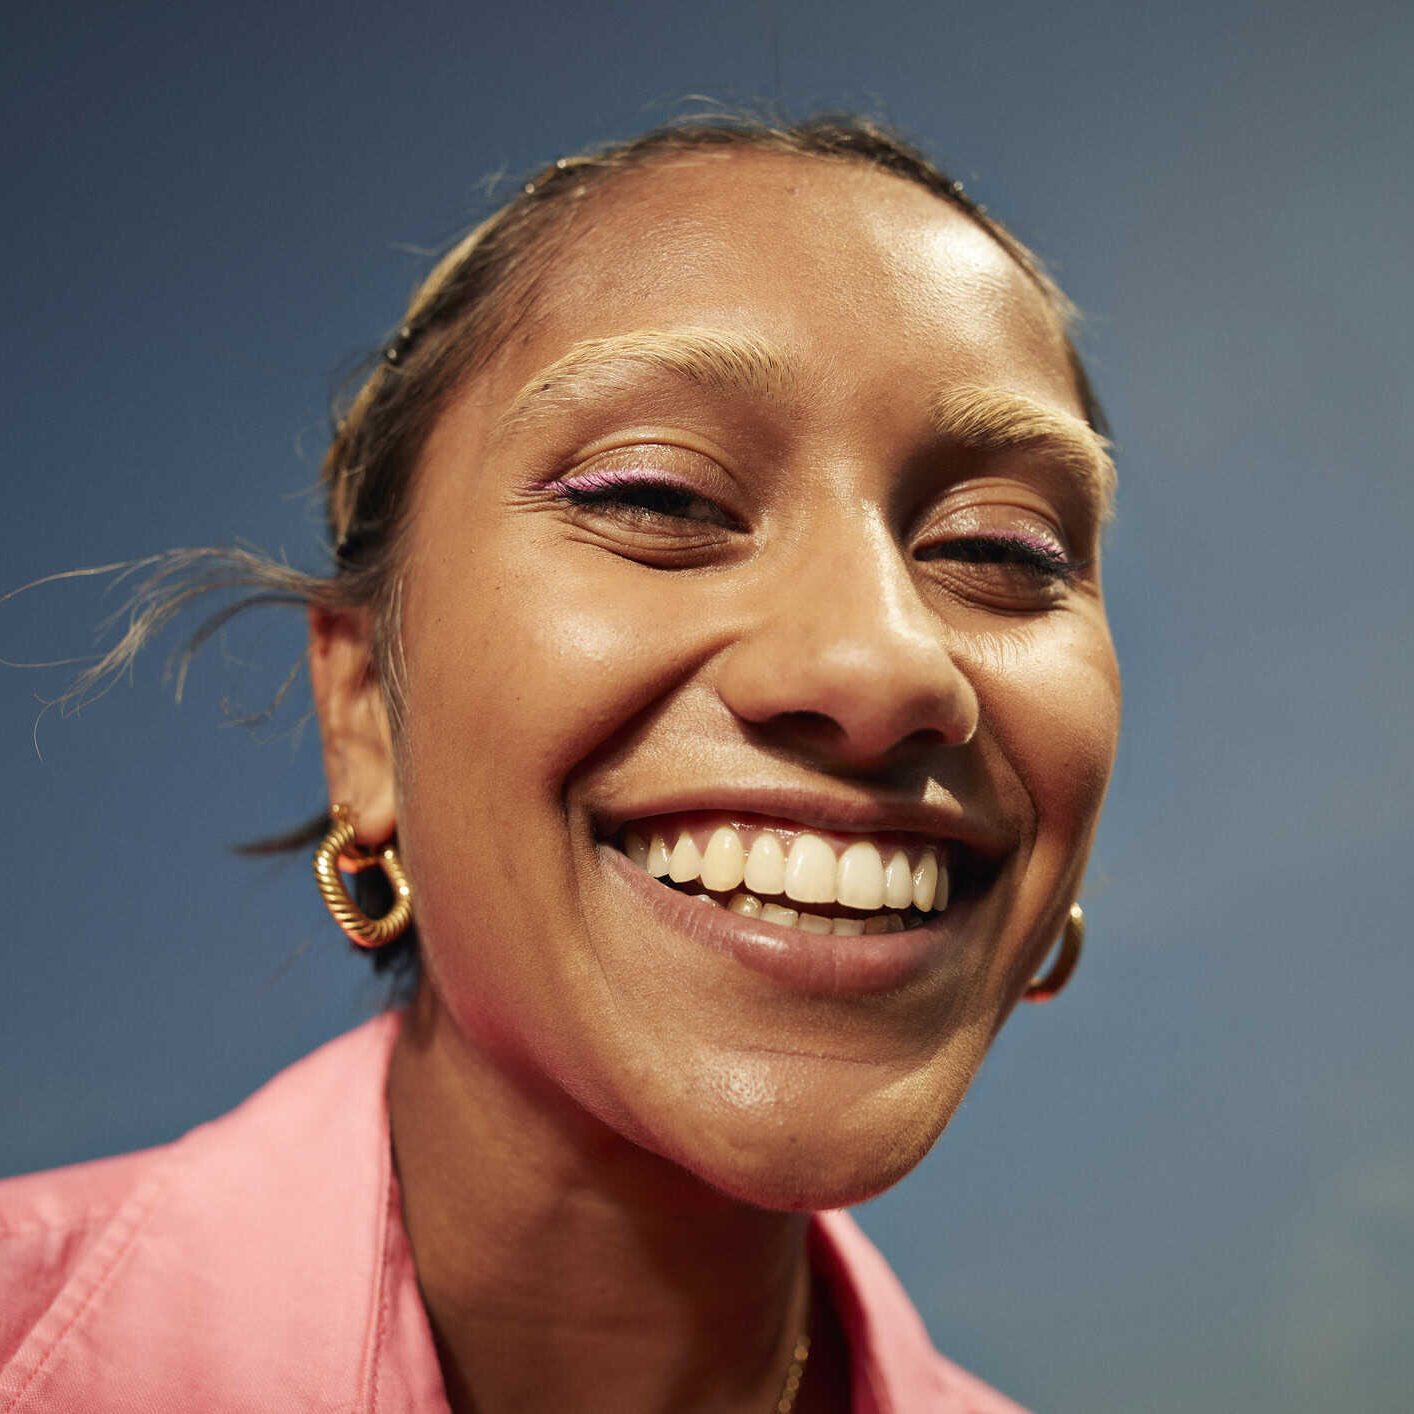 Close-up portrait of happy young woman with toothy smile against sky